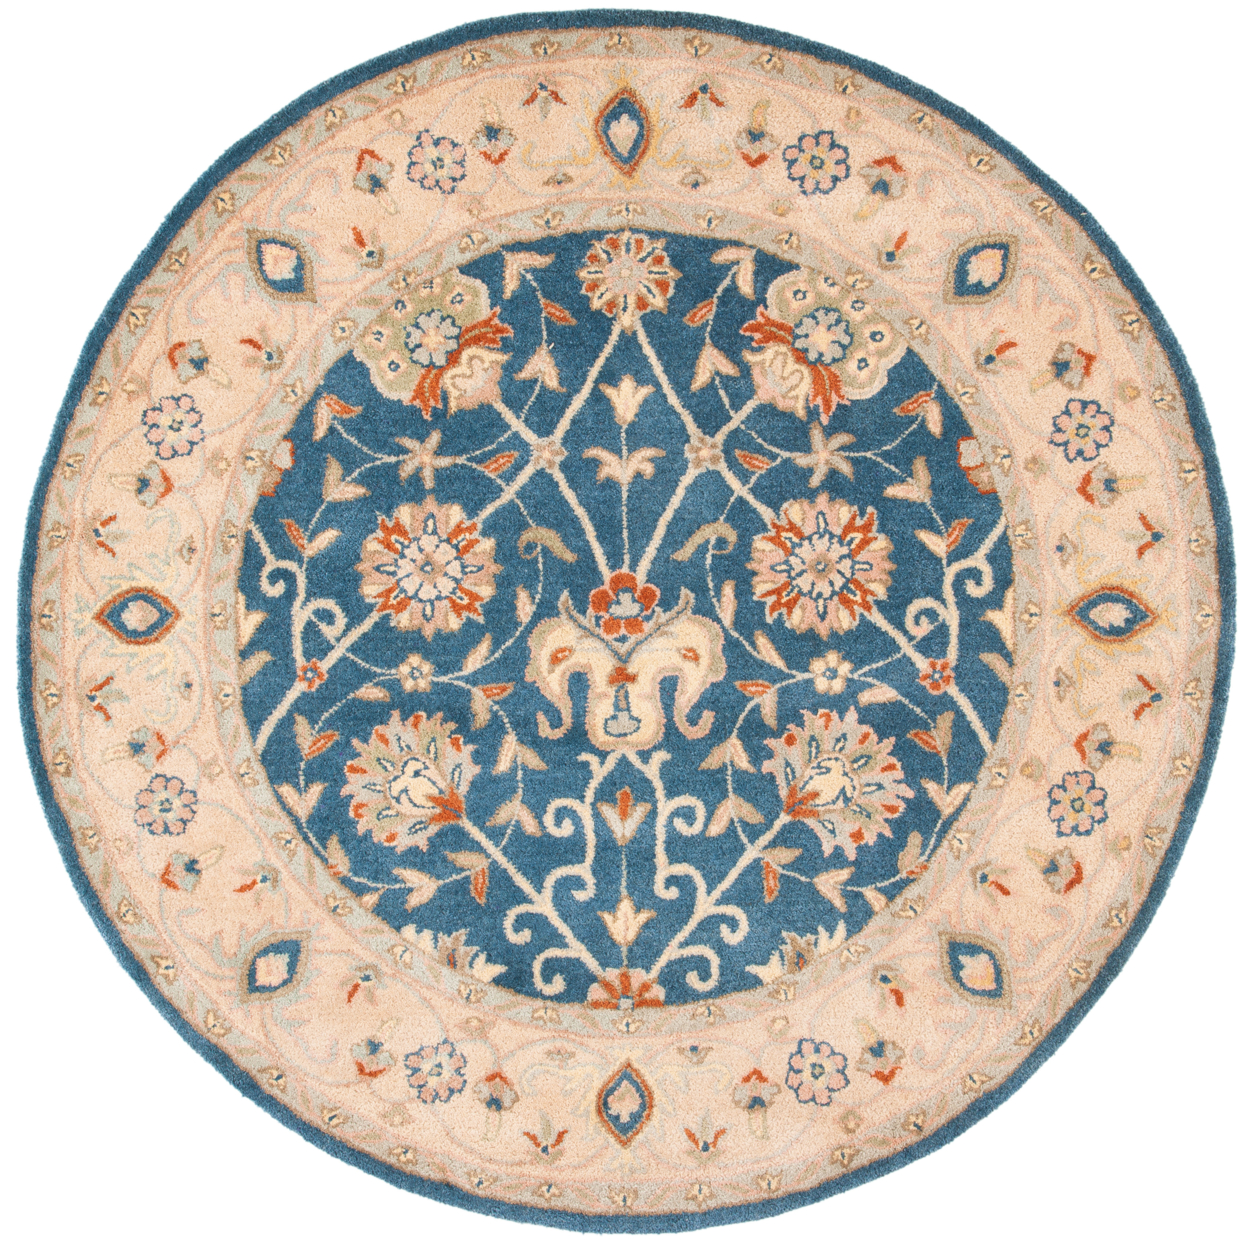 SAFAVIEH Antiquity Collection AT21E Handmade Blue Rug - 6' Round